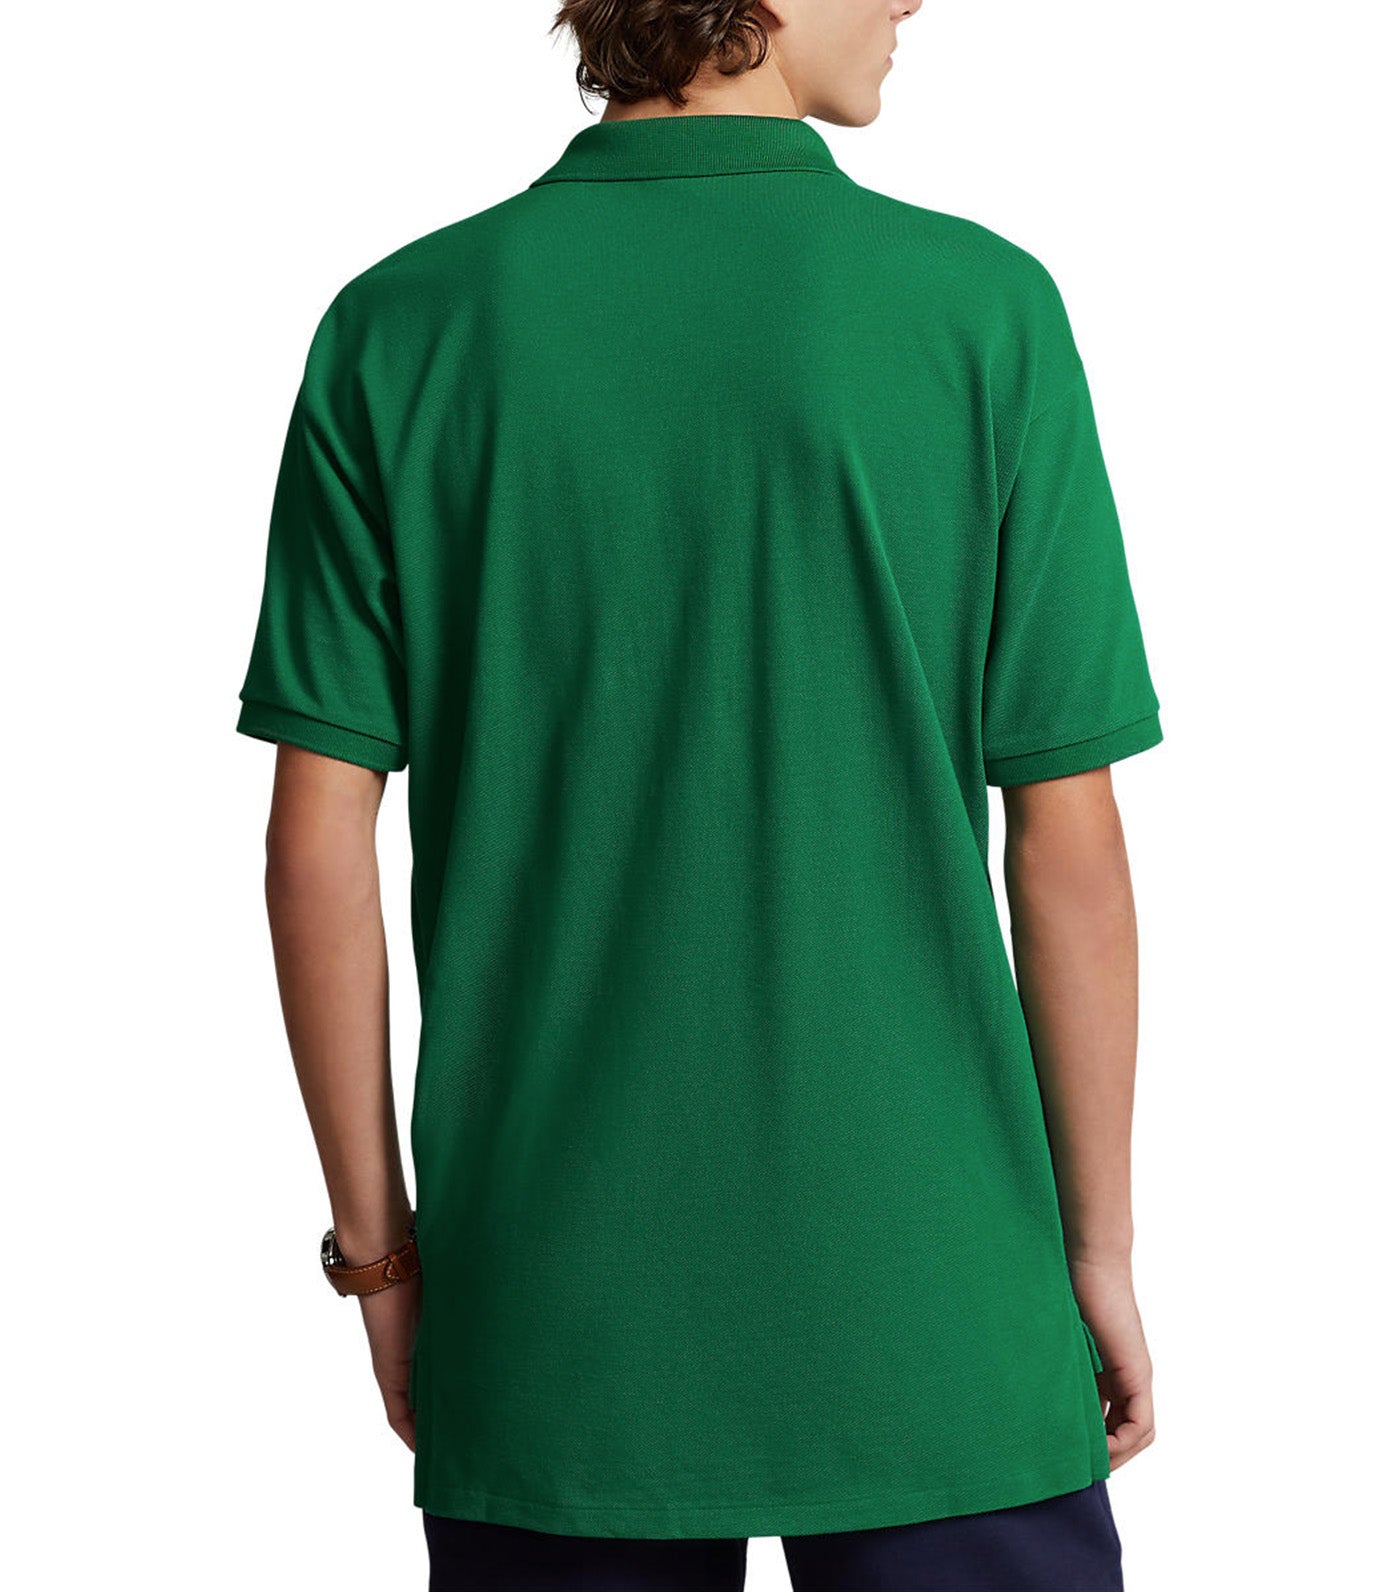 Men's Big Fit Mesh Polo Shirt Primary Green